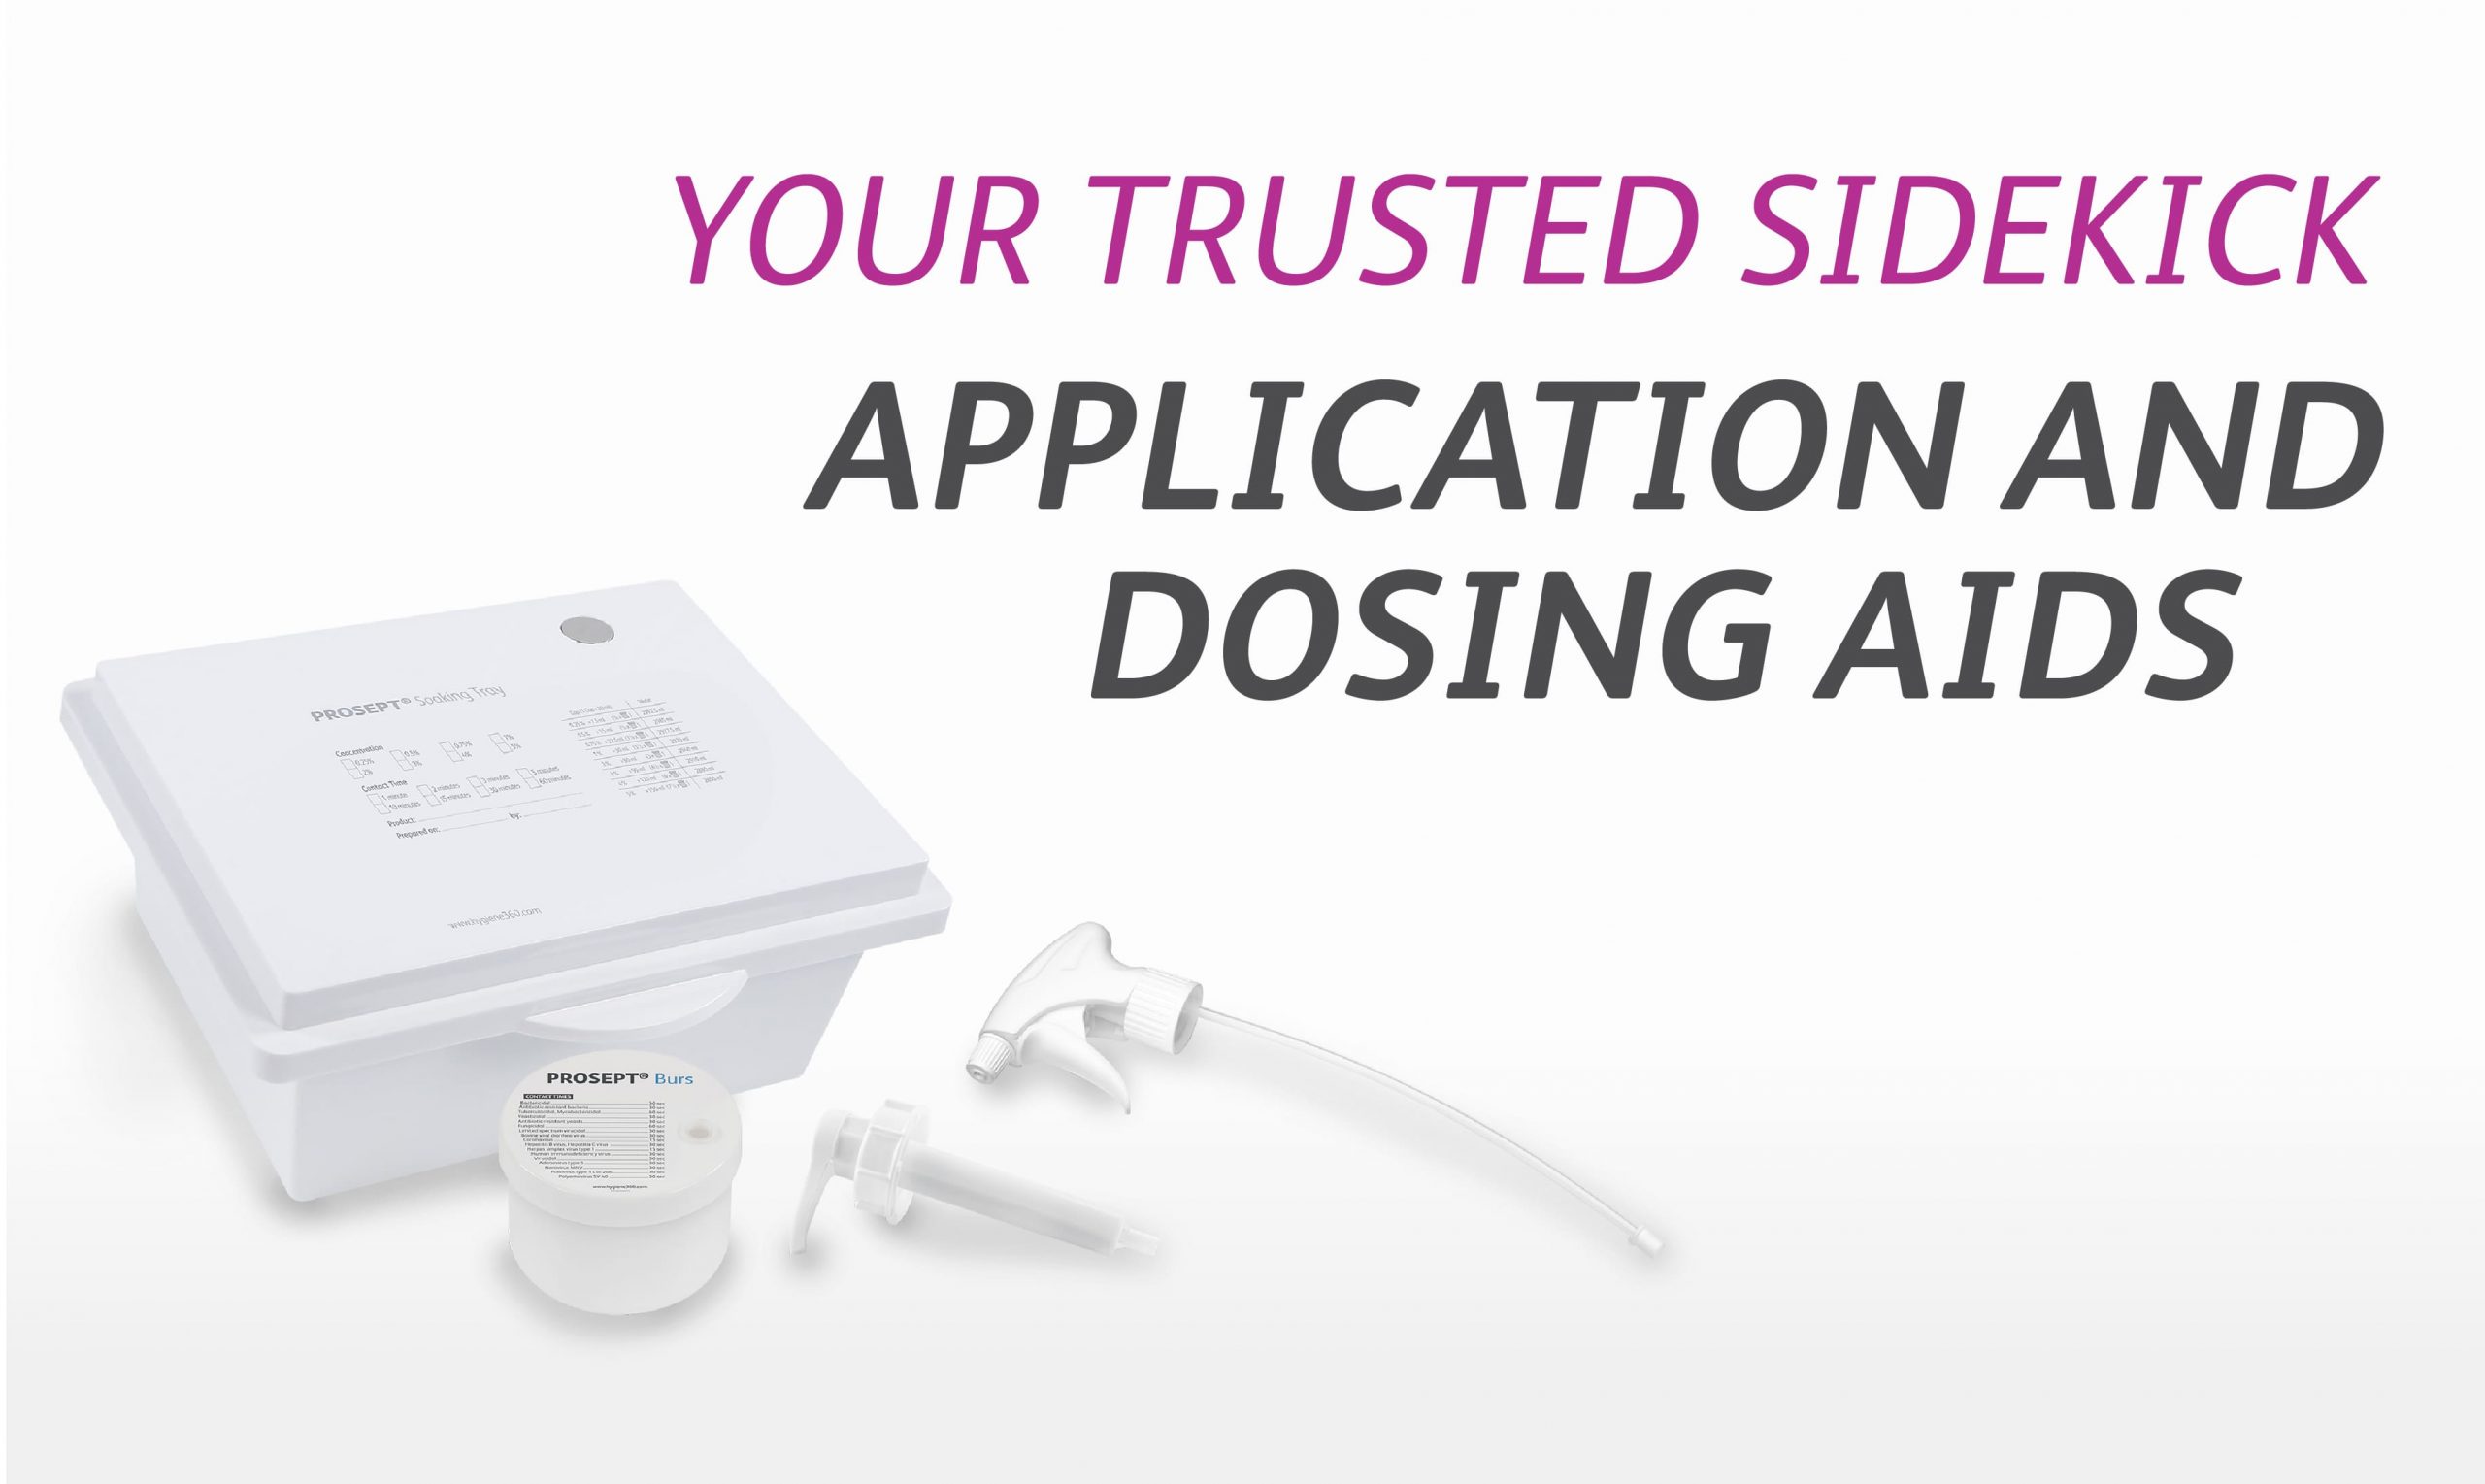 Application and Dosing Aids